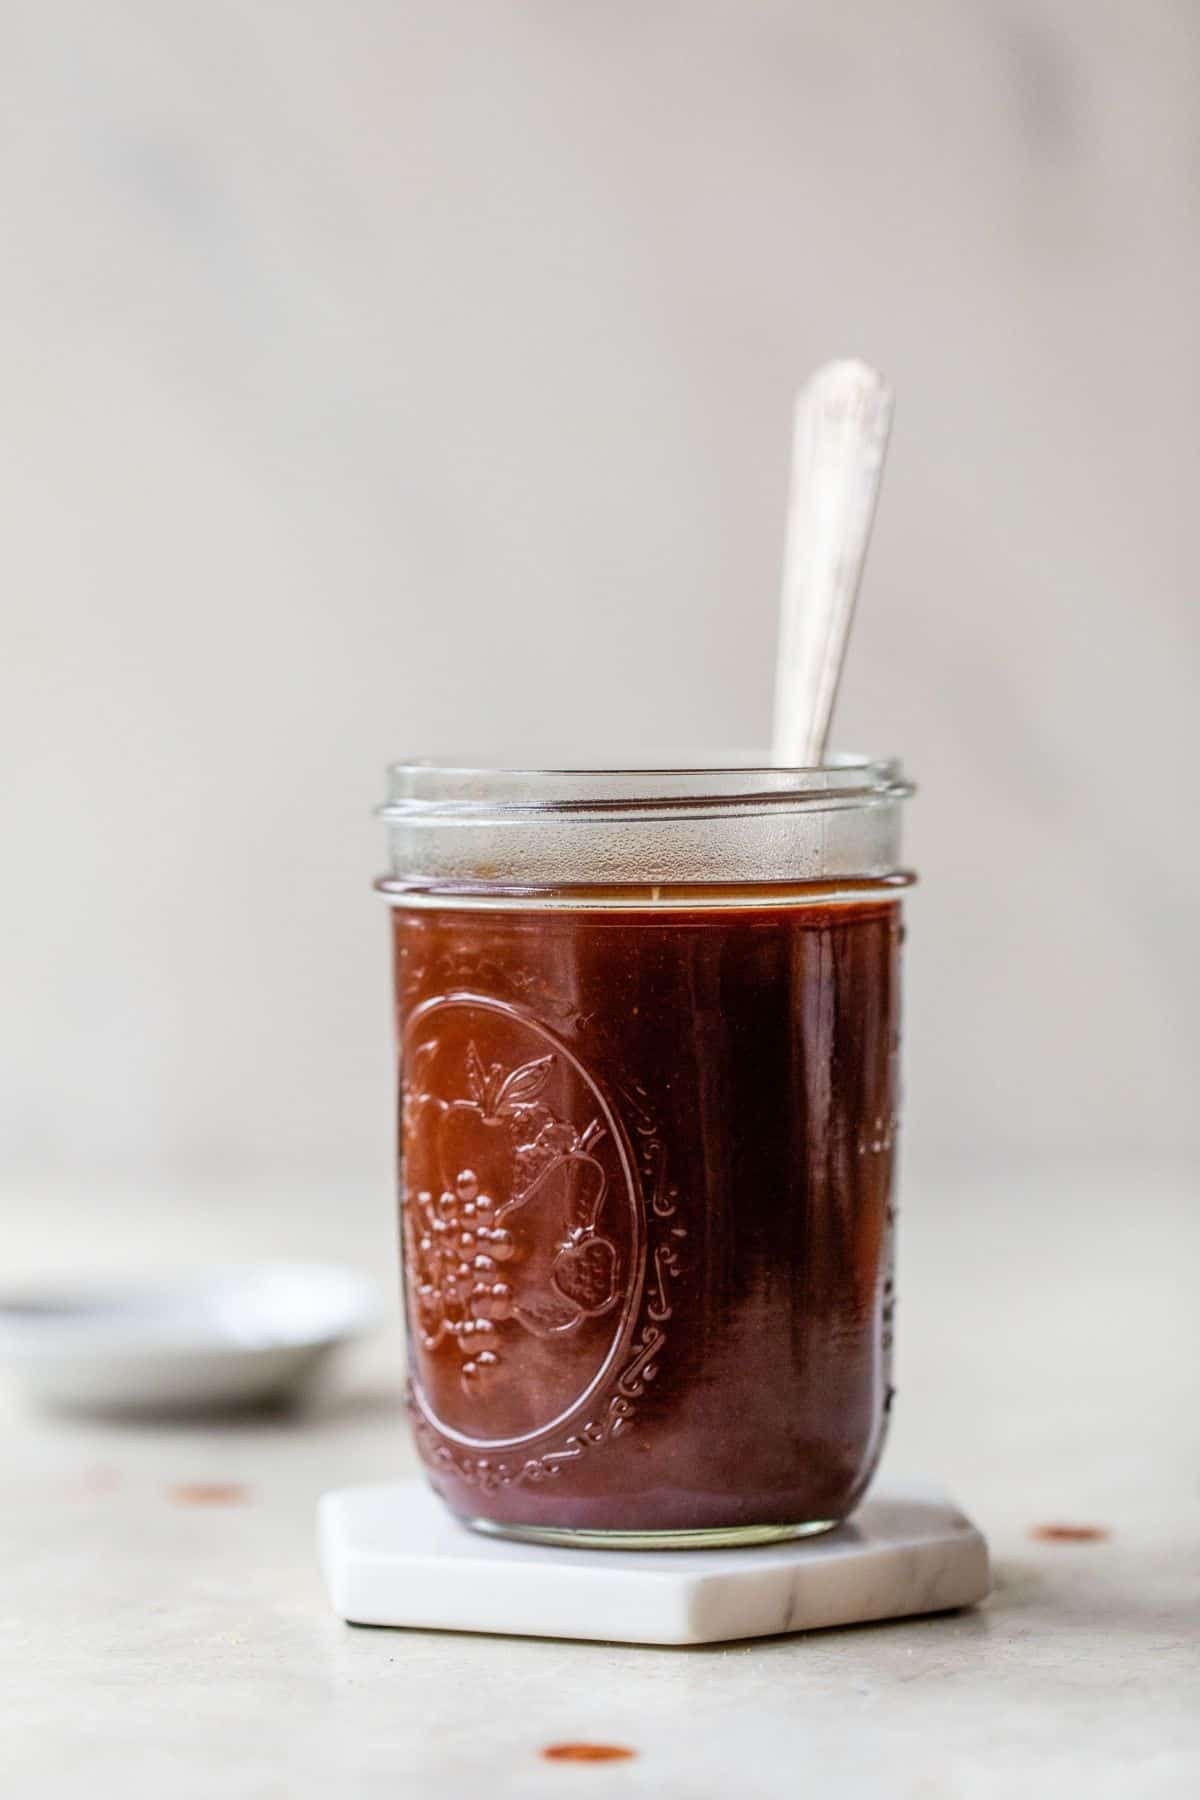 A jar of BBQ sauce with a spoon in it.